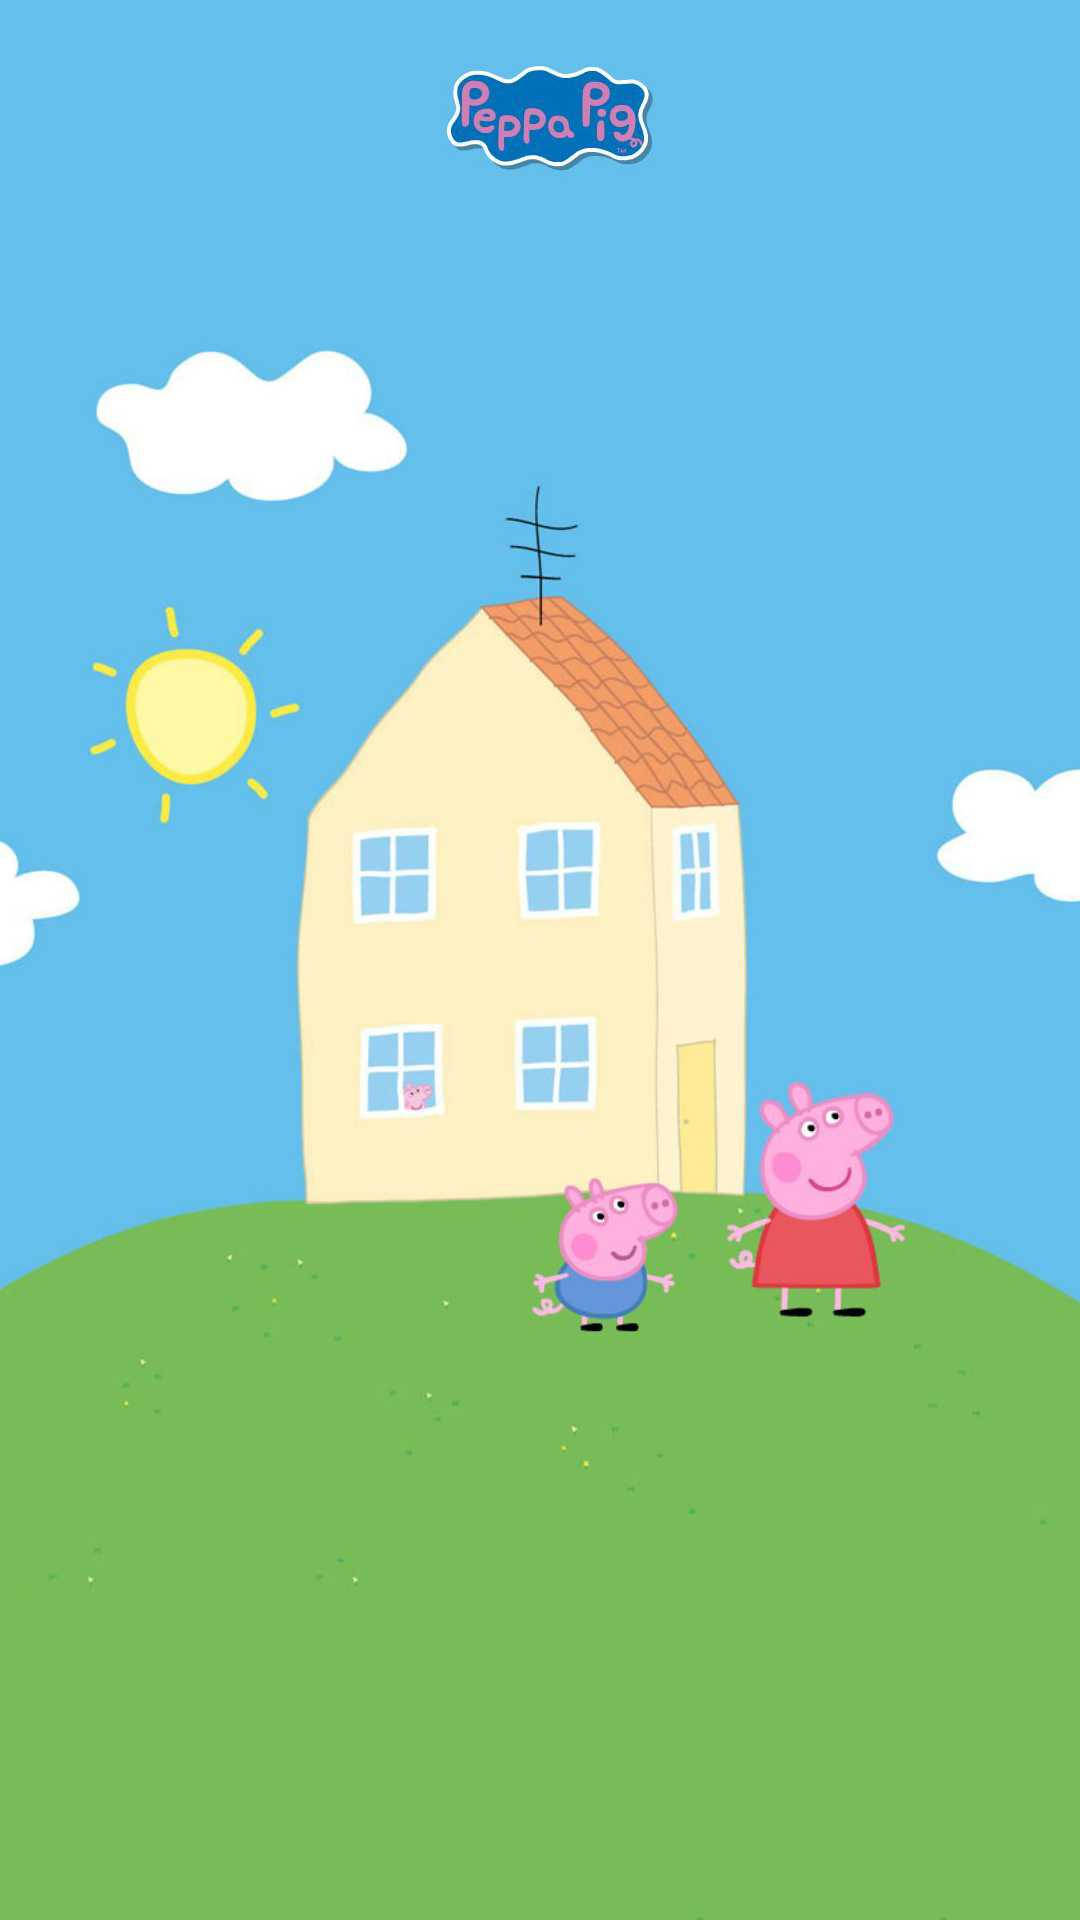 George And Peppa Pig Iphone Background